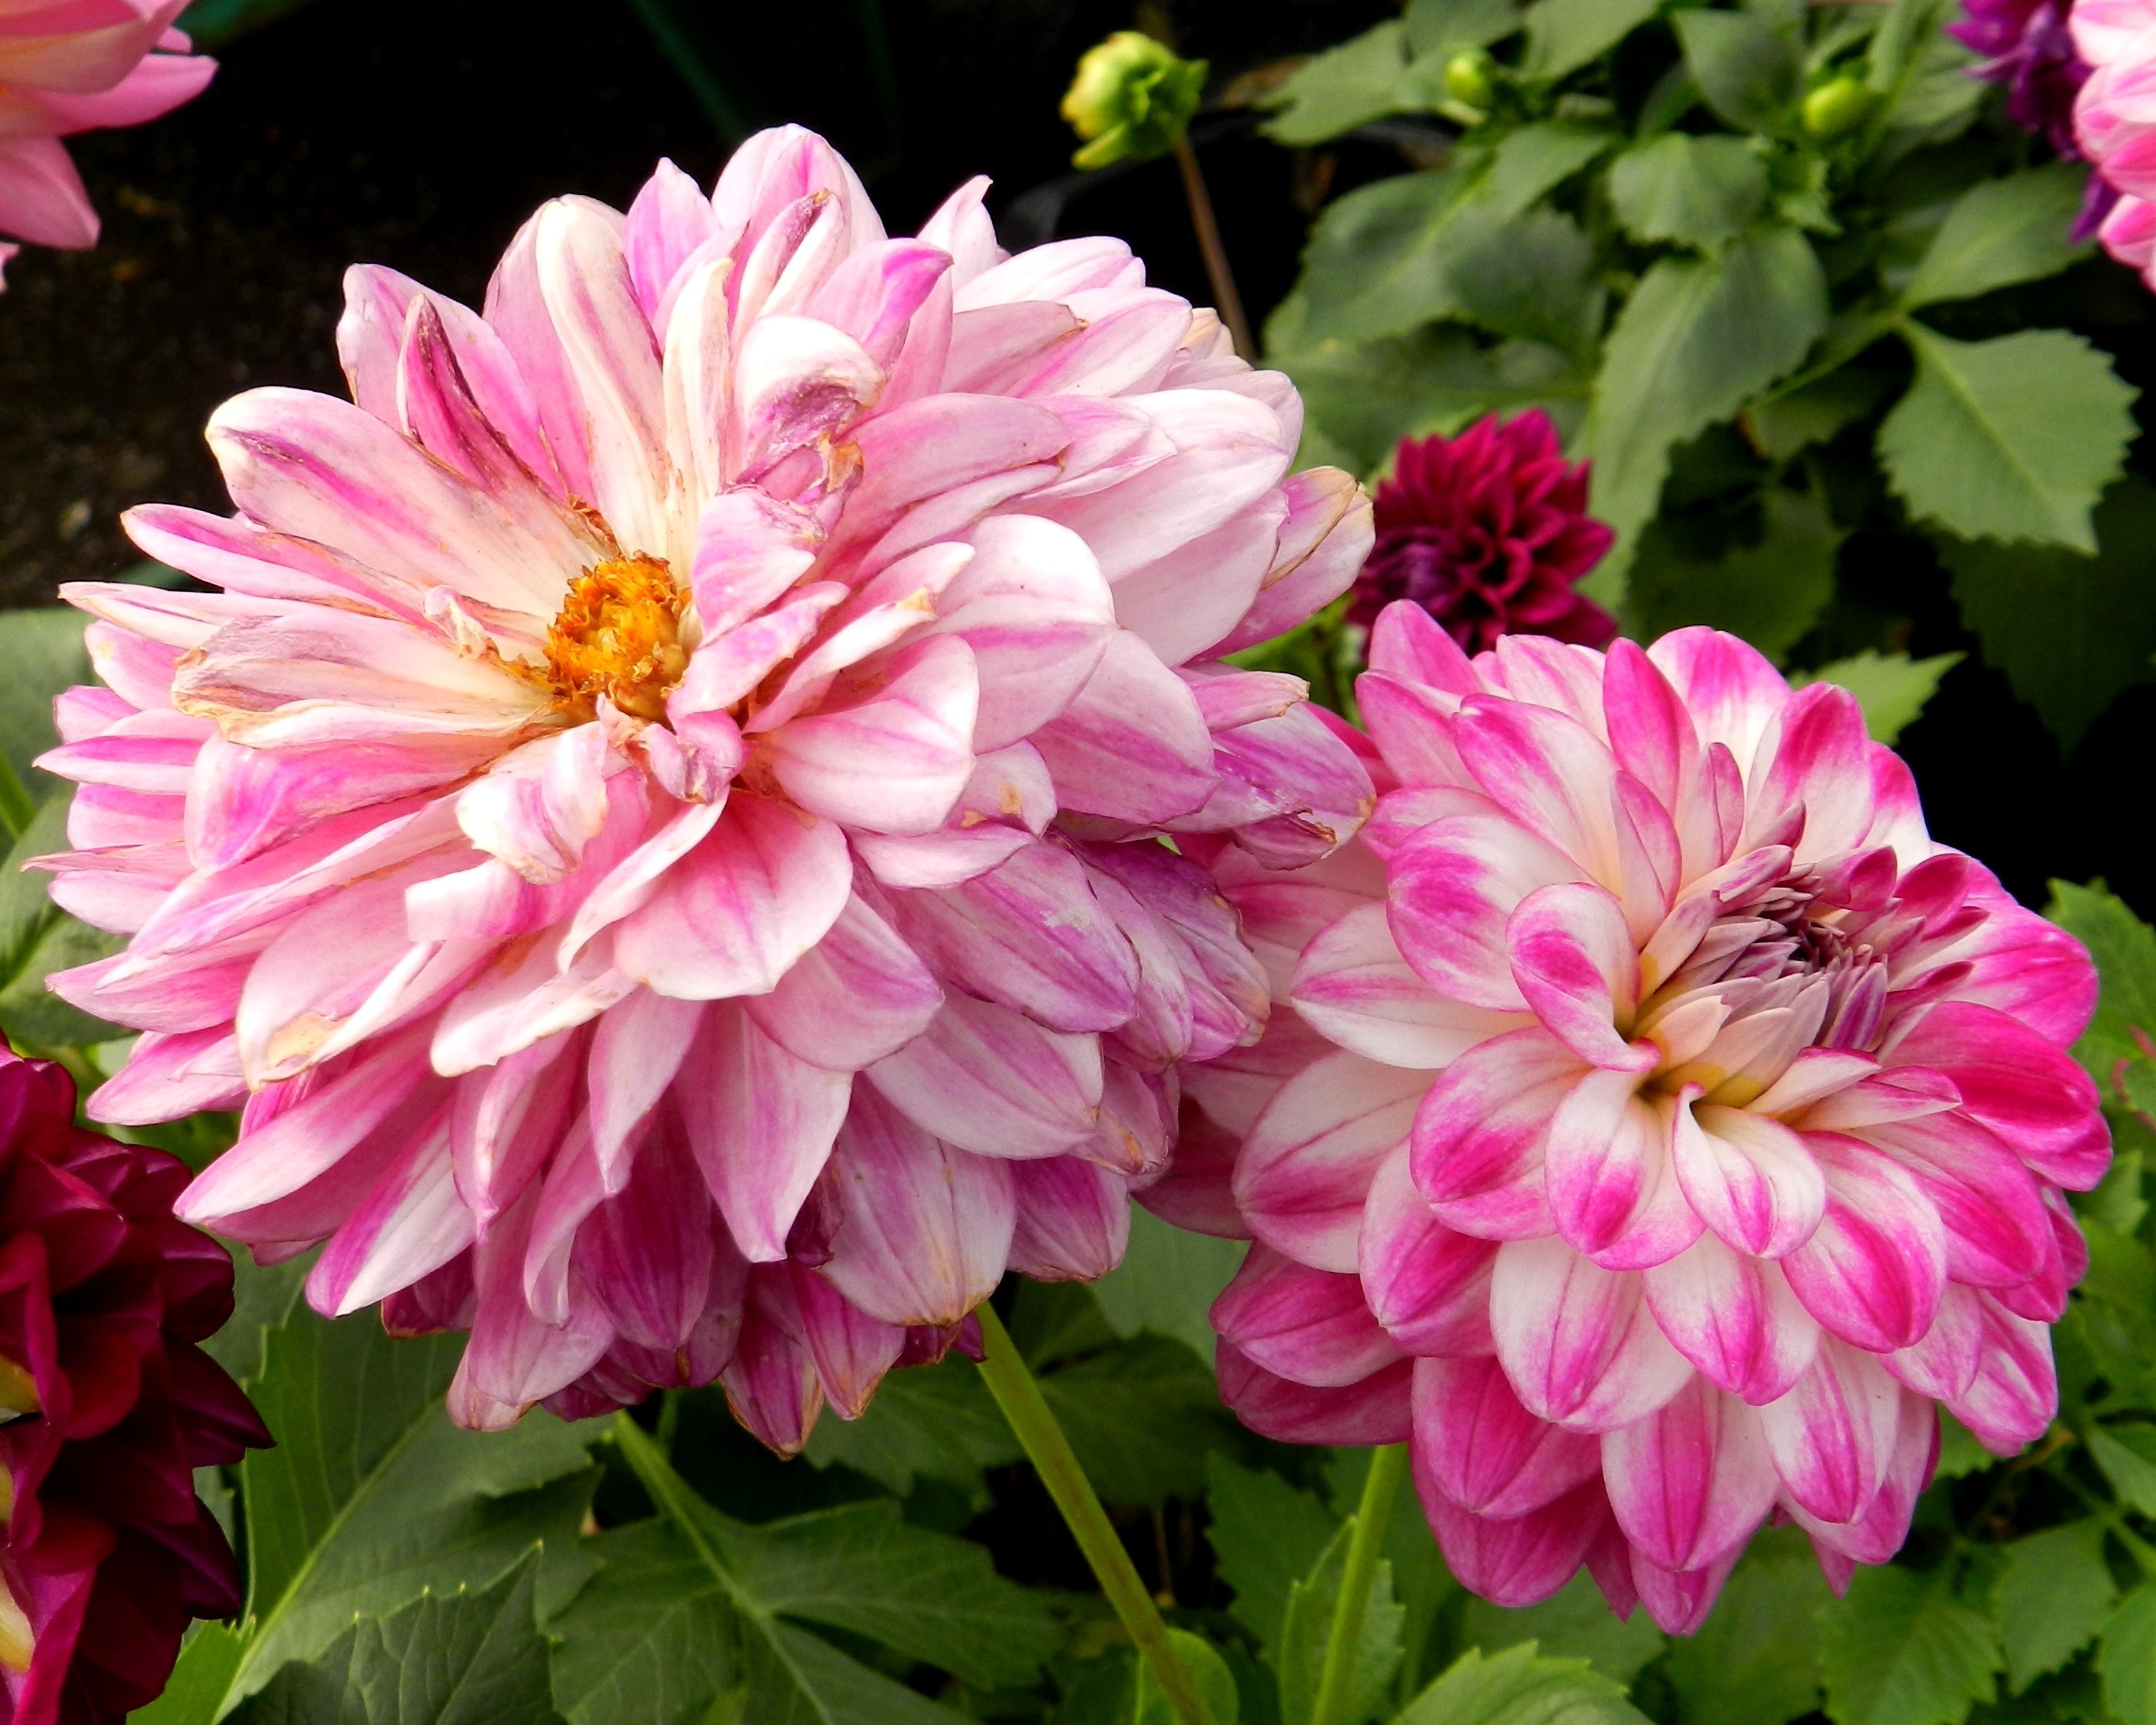 2 pink and white clustered flowers